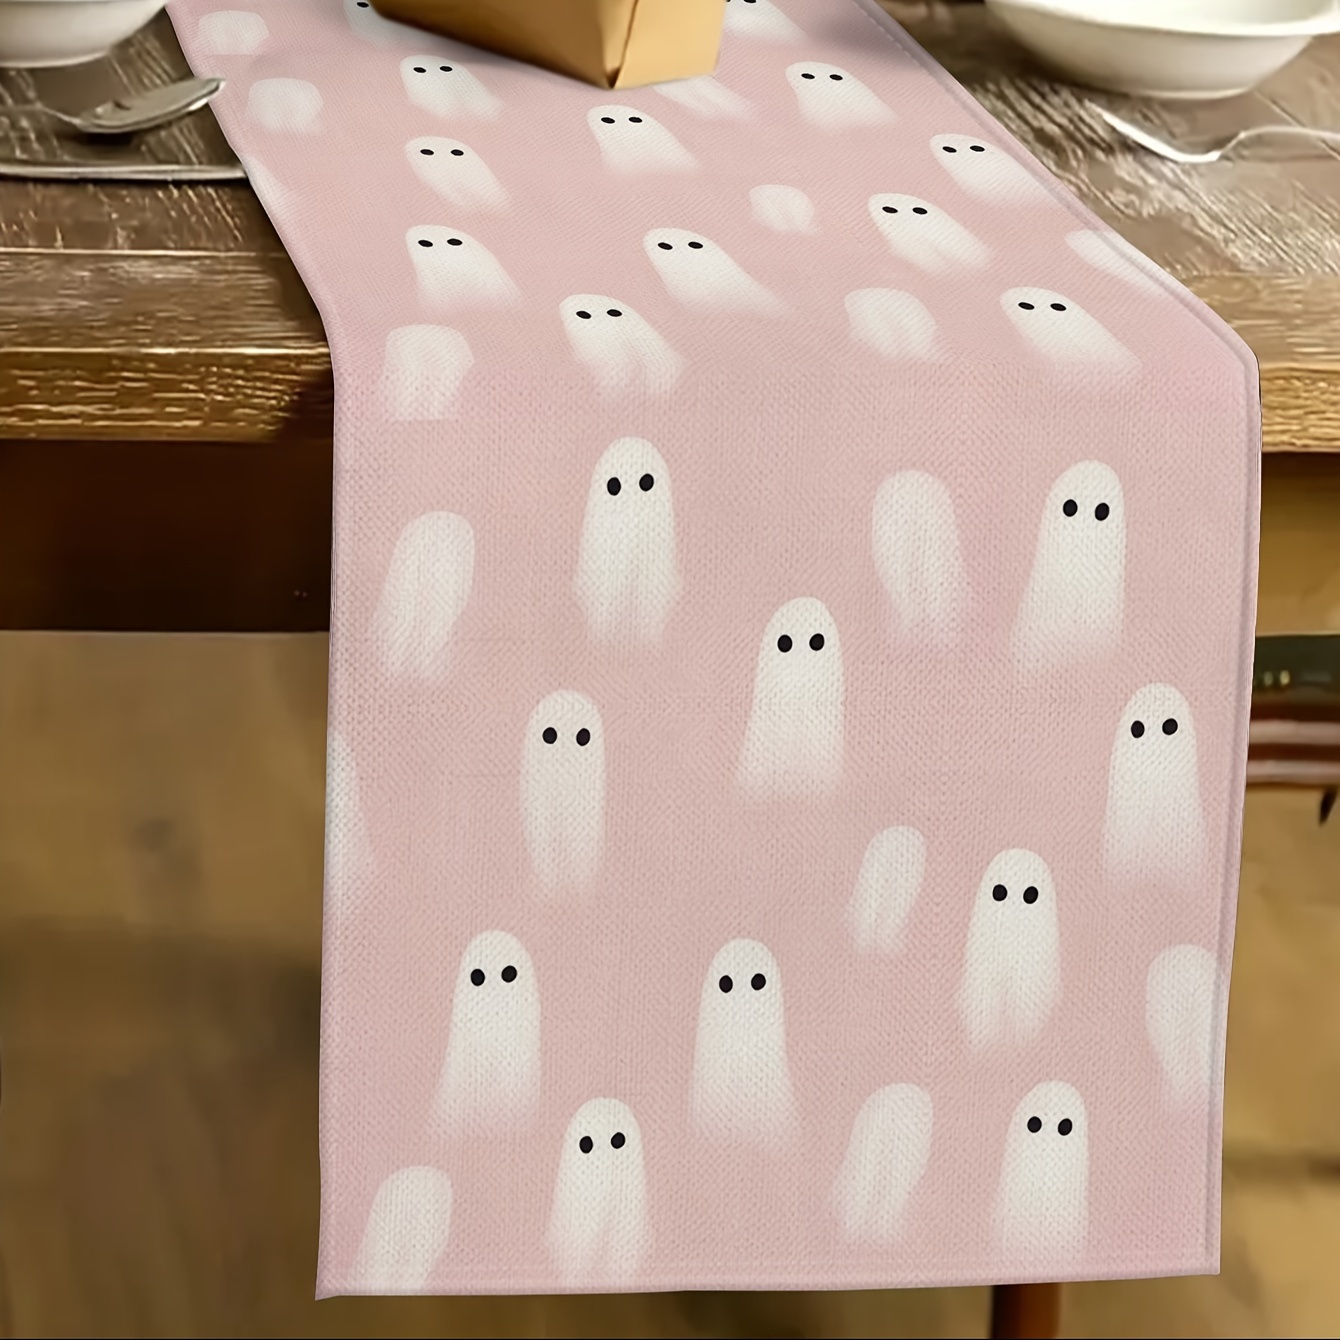 

Spooky Halloween Table Runner - Pink Ghost & Bat Design, Linen Blend, Perfect For Fall Dining Decor & Party Supplies